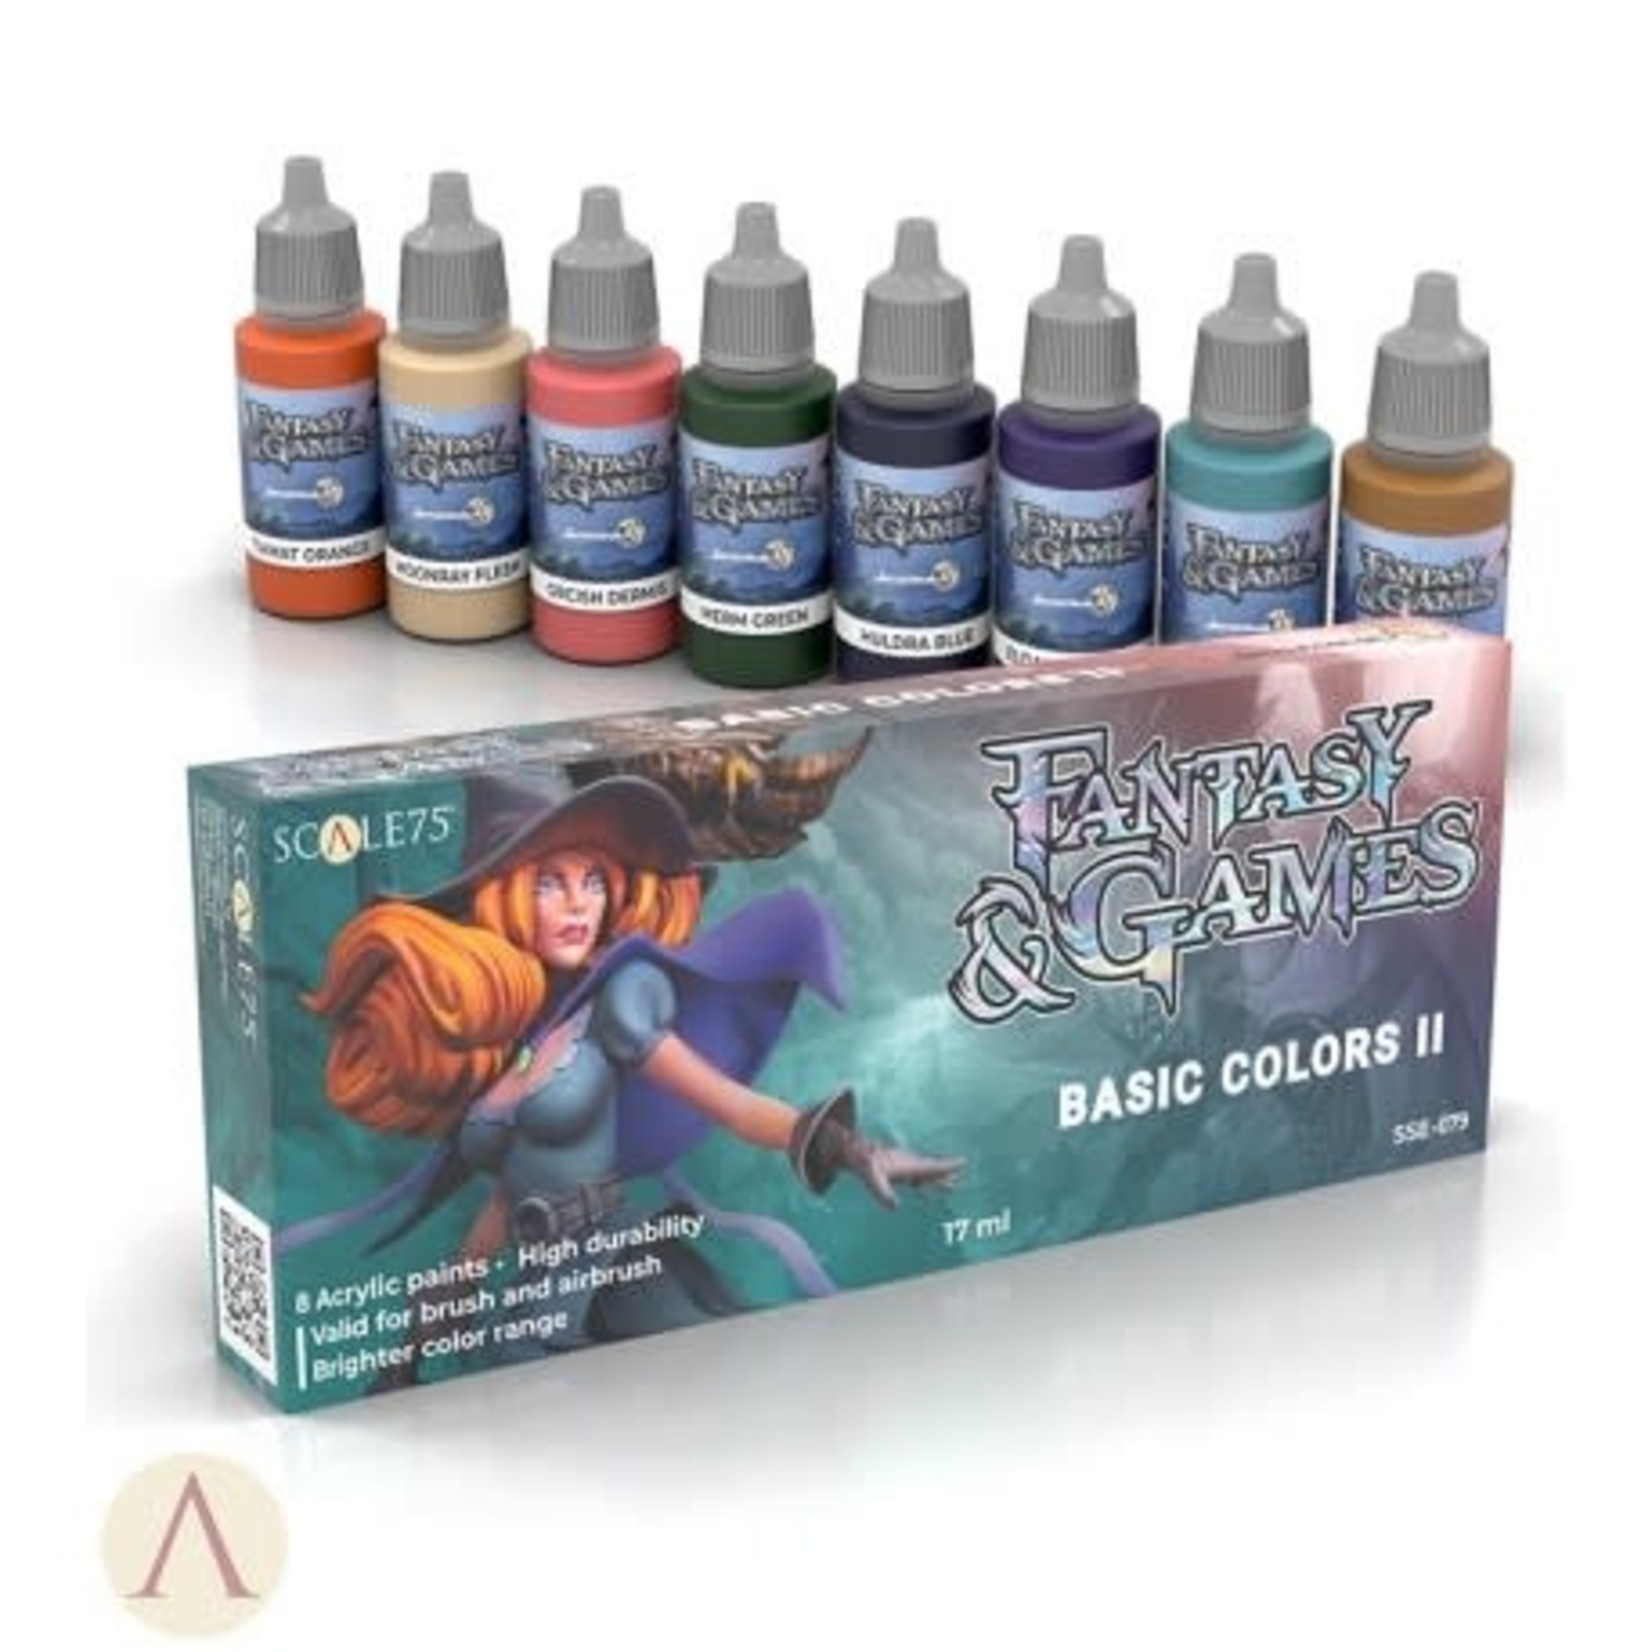 Scale 75 Fantasy and Games SSE079 Basic Colors II Paint (8) Set